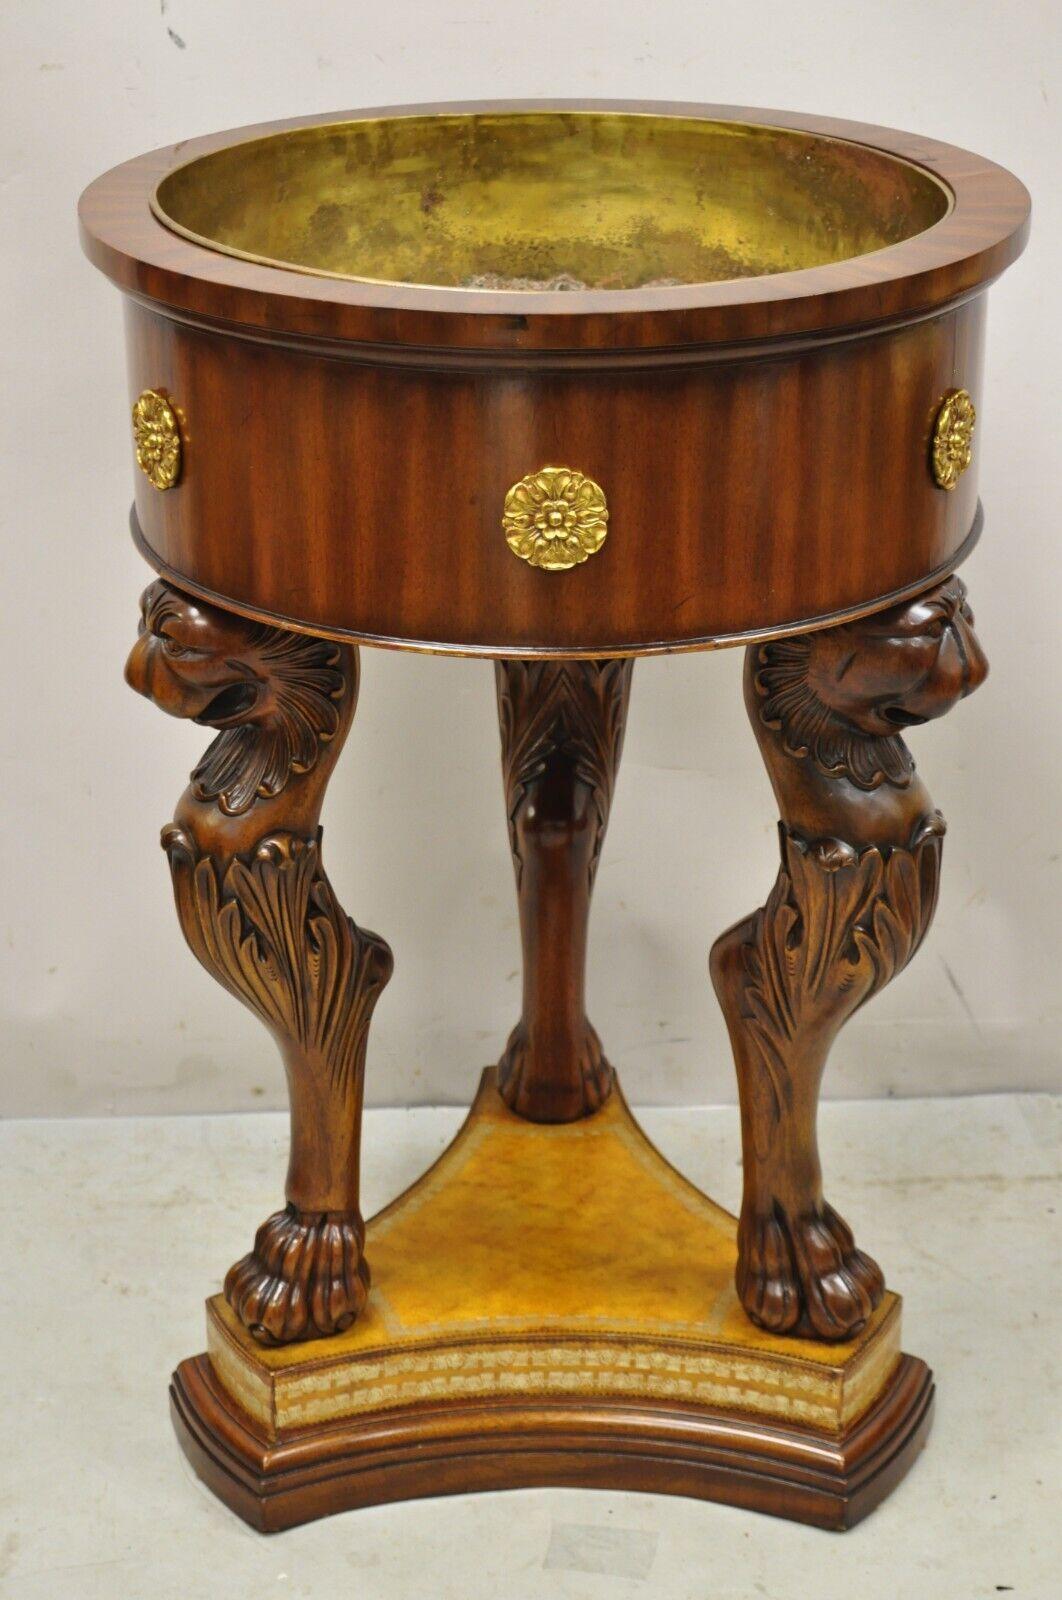 Maitland Smith Regency Style Mahogany Carved Lion Cellaret Planter with Leather Base. Item features a tooled leather base, carved lions and paw feet, brass ormolu, removable brass liner, original label, very nice vintage item, great style and form.